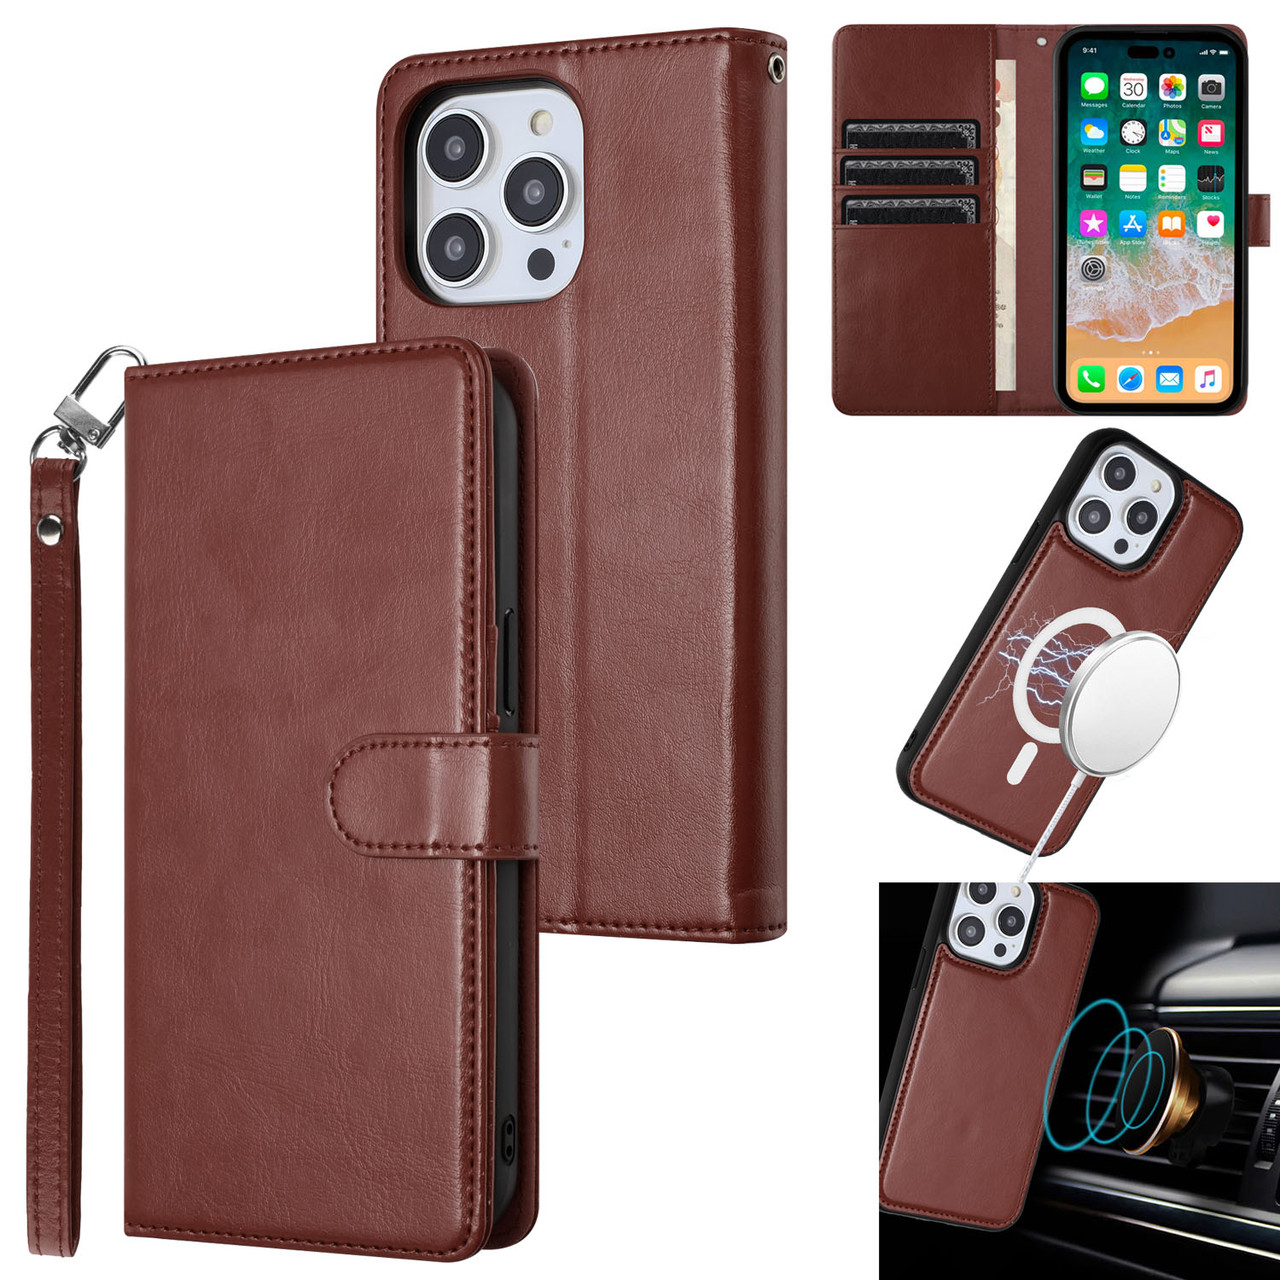 What is Magnetic Smart Phone Wallet Leather Magsafe Wallet with Kick Stand  Card Holder